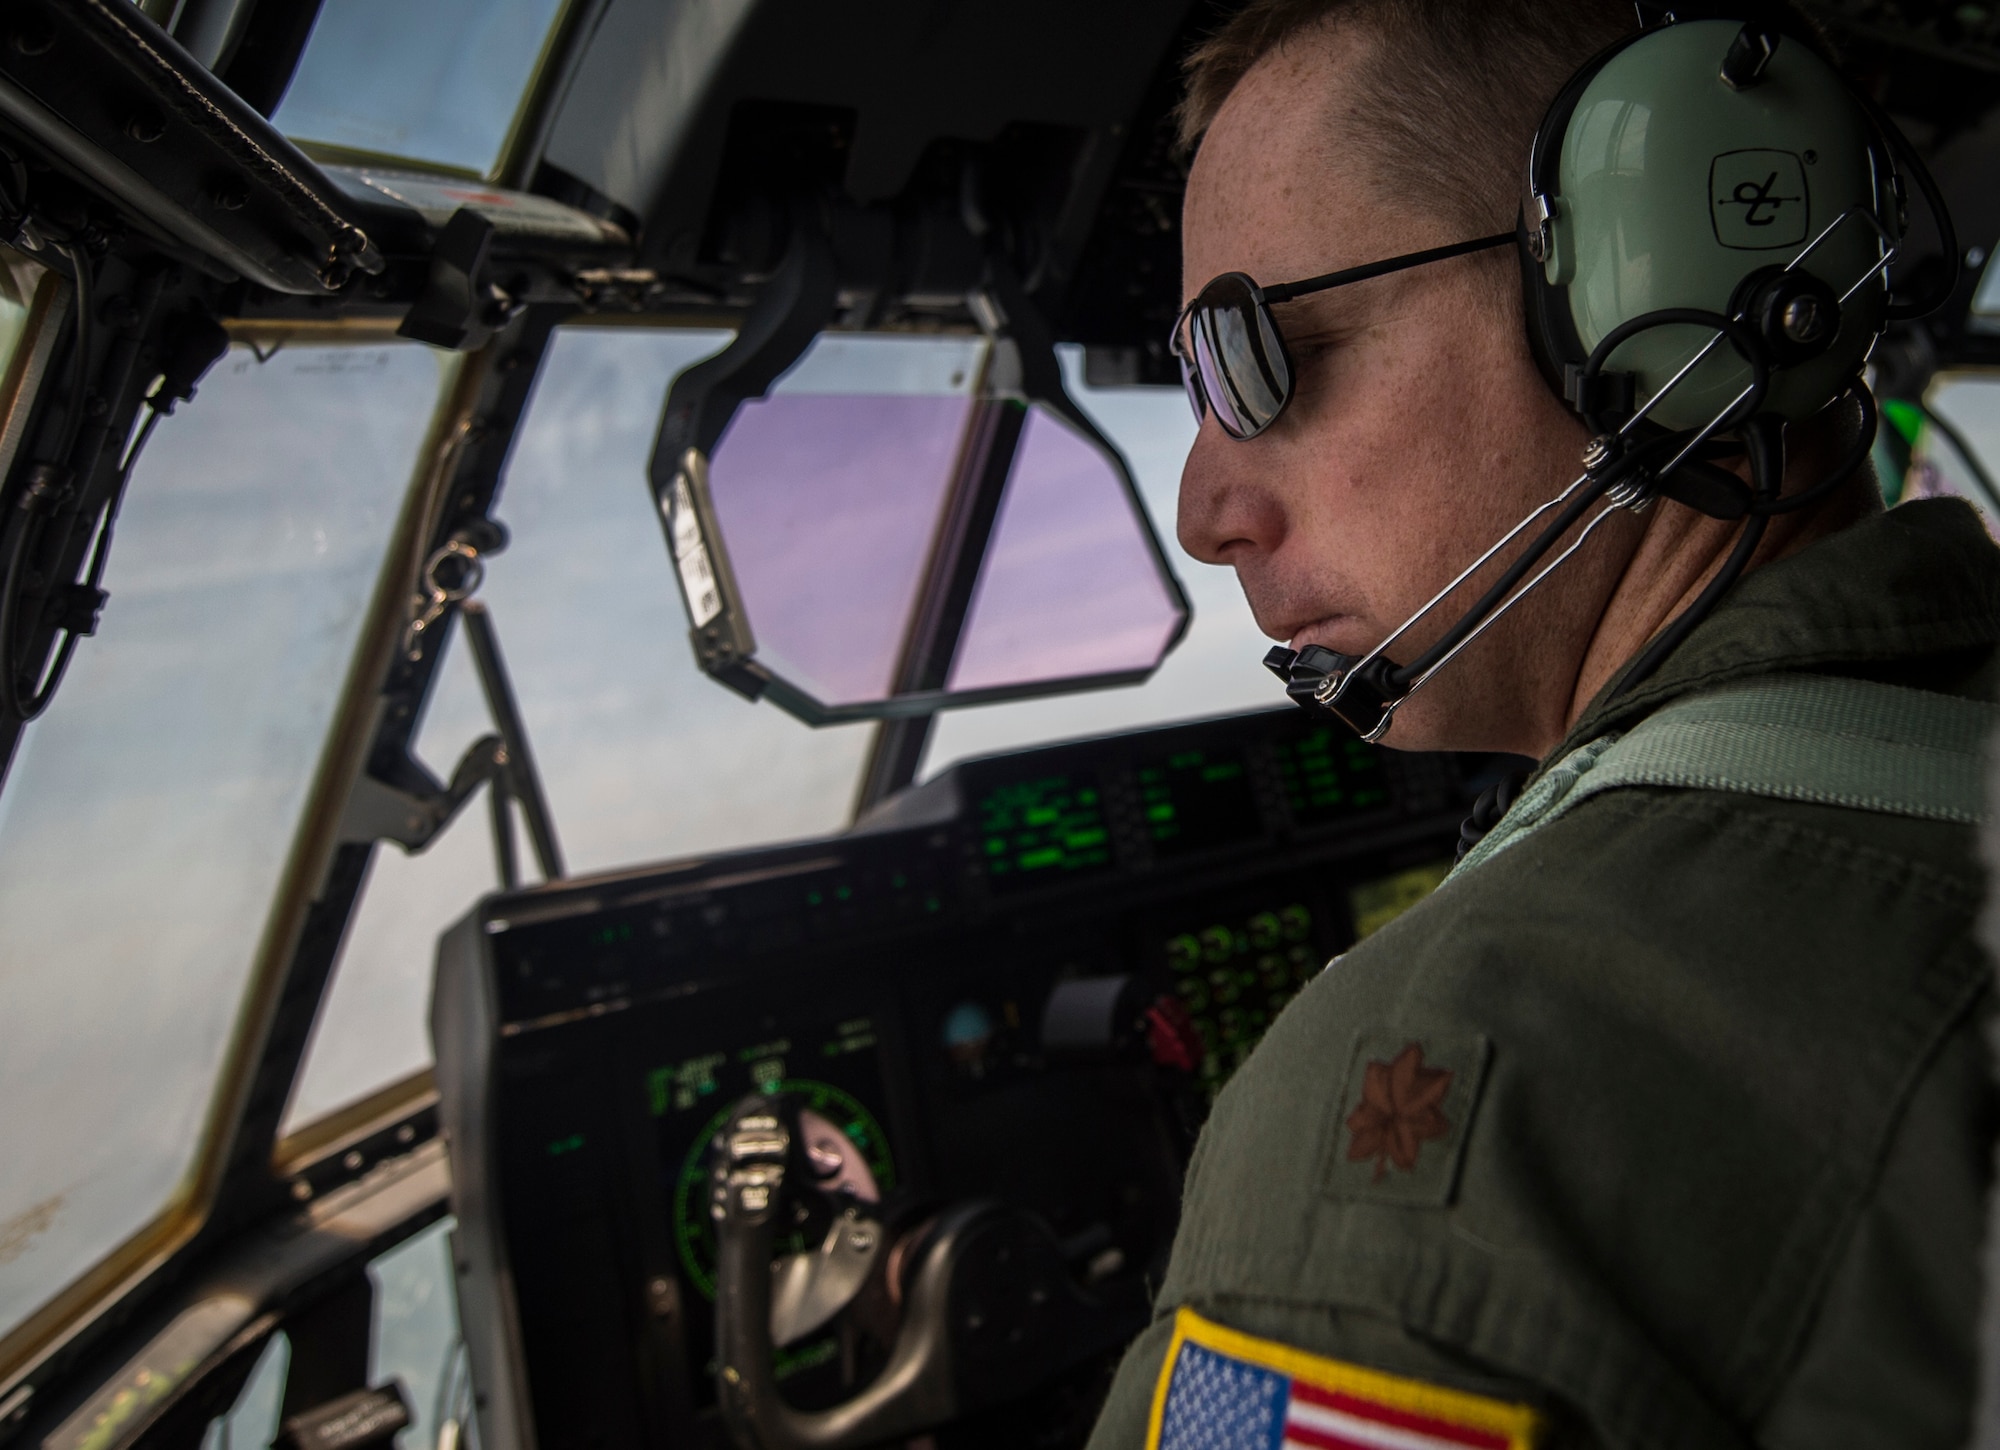 Maj. Jason Fox, 18th Flight Test Squadron pilot, delivers the Air Force Special Operations Commands first AC-130J Ghostrider to the 1st Special Operations Wing on Hurlburt Field, Fla., July 29, 2015. The AC-130J recently completed its initial developmental test and evaluation at Eglin Air Force Base, Fla., and will begin operational test and evaluation under aircrews of the 1st Special Operations Group Det. 2 and 1st Special Operations Aircraft Maintenance Squadron later this year. (U.S. Air Force photo/Senior Airman Christopher Callaway)